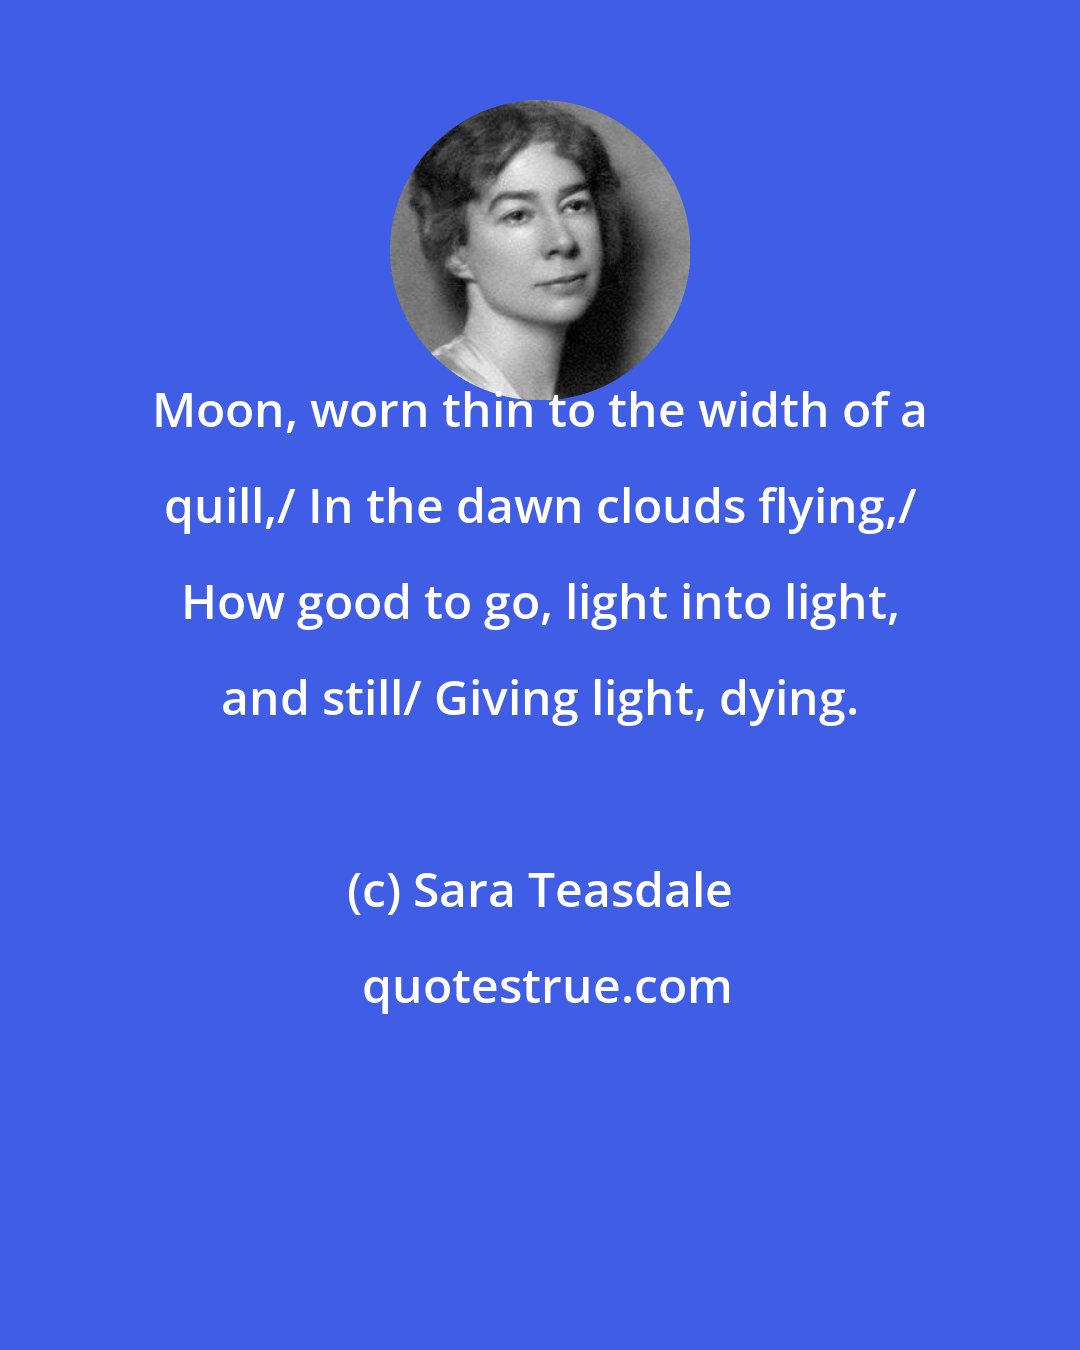 Sara Teasdale: Moon, worn thin to the width of a quill,/ In the dawn clouds flying,/ How good to go, light into light, and still/ Giving light, dying.